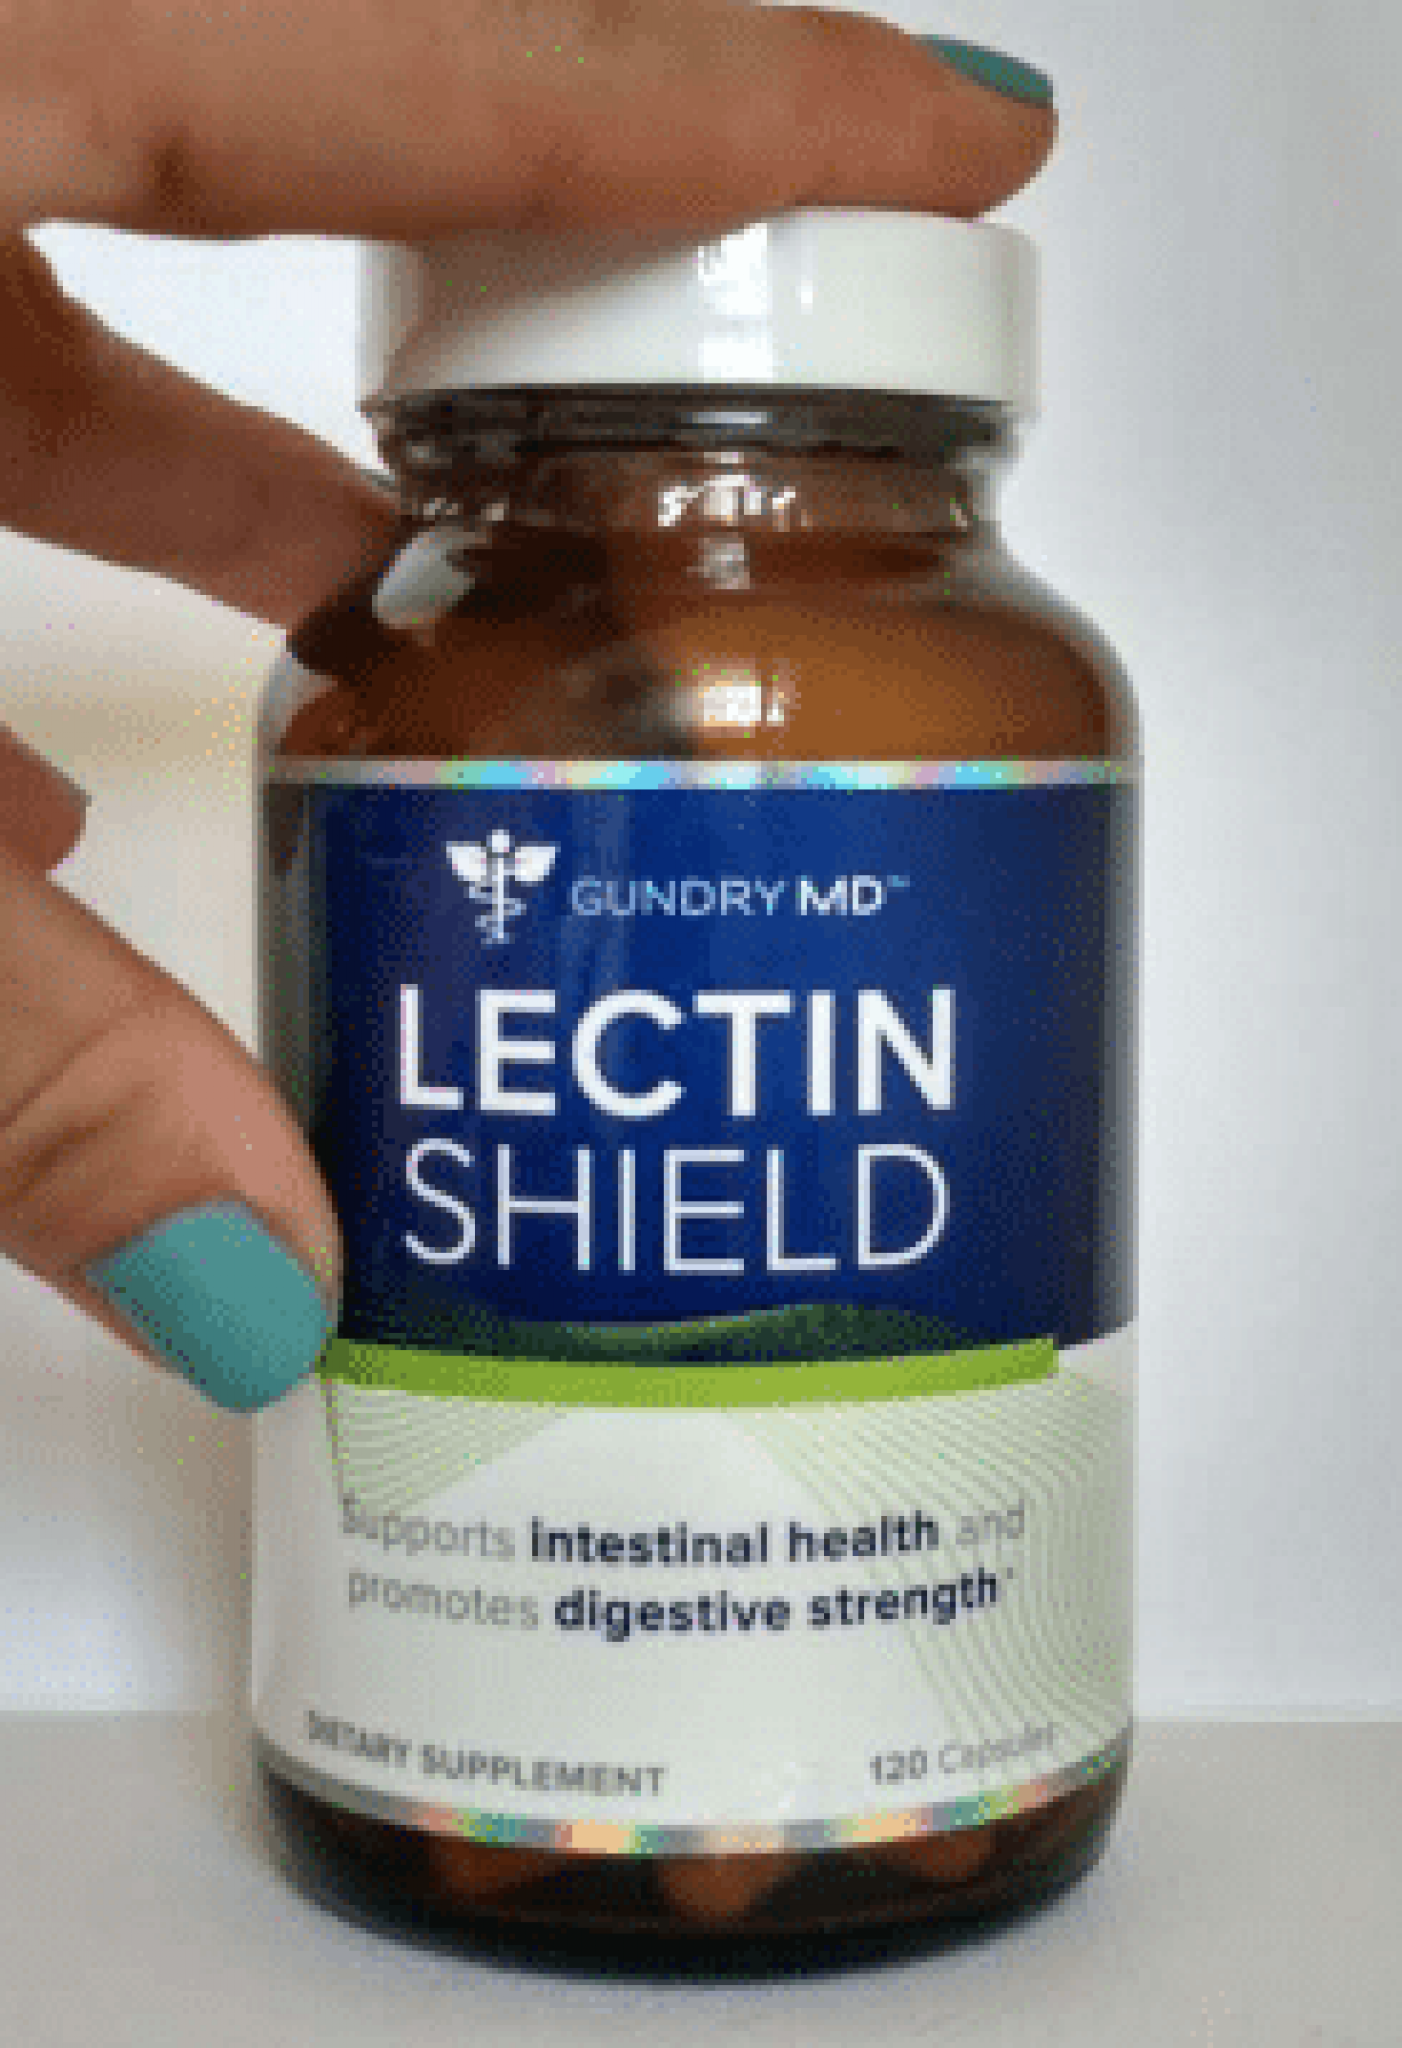 LECTIN SHIELD REVIEWS EVERYTHING YOU NEED TO KNOW